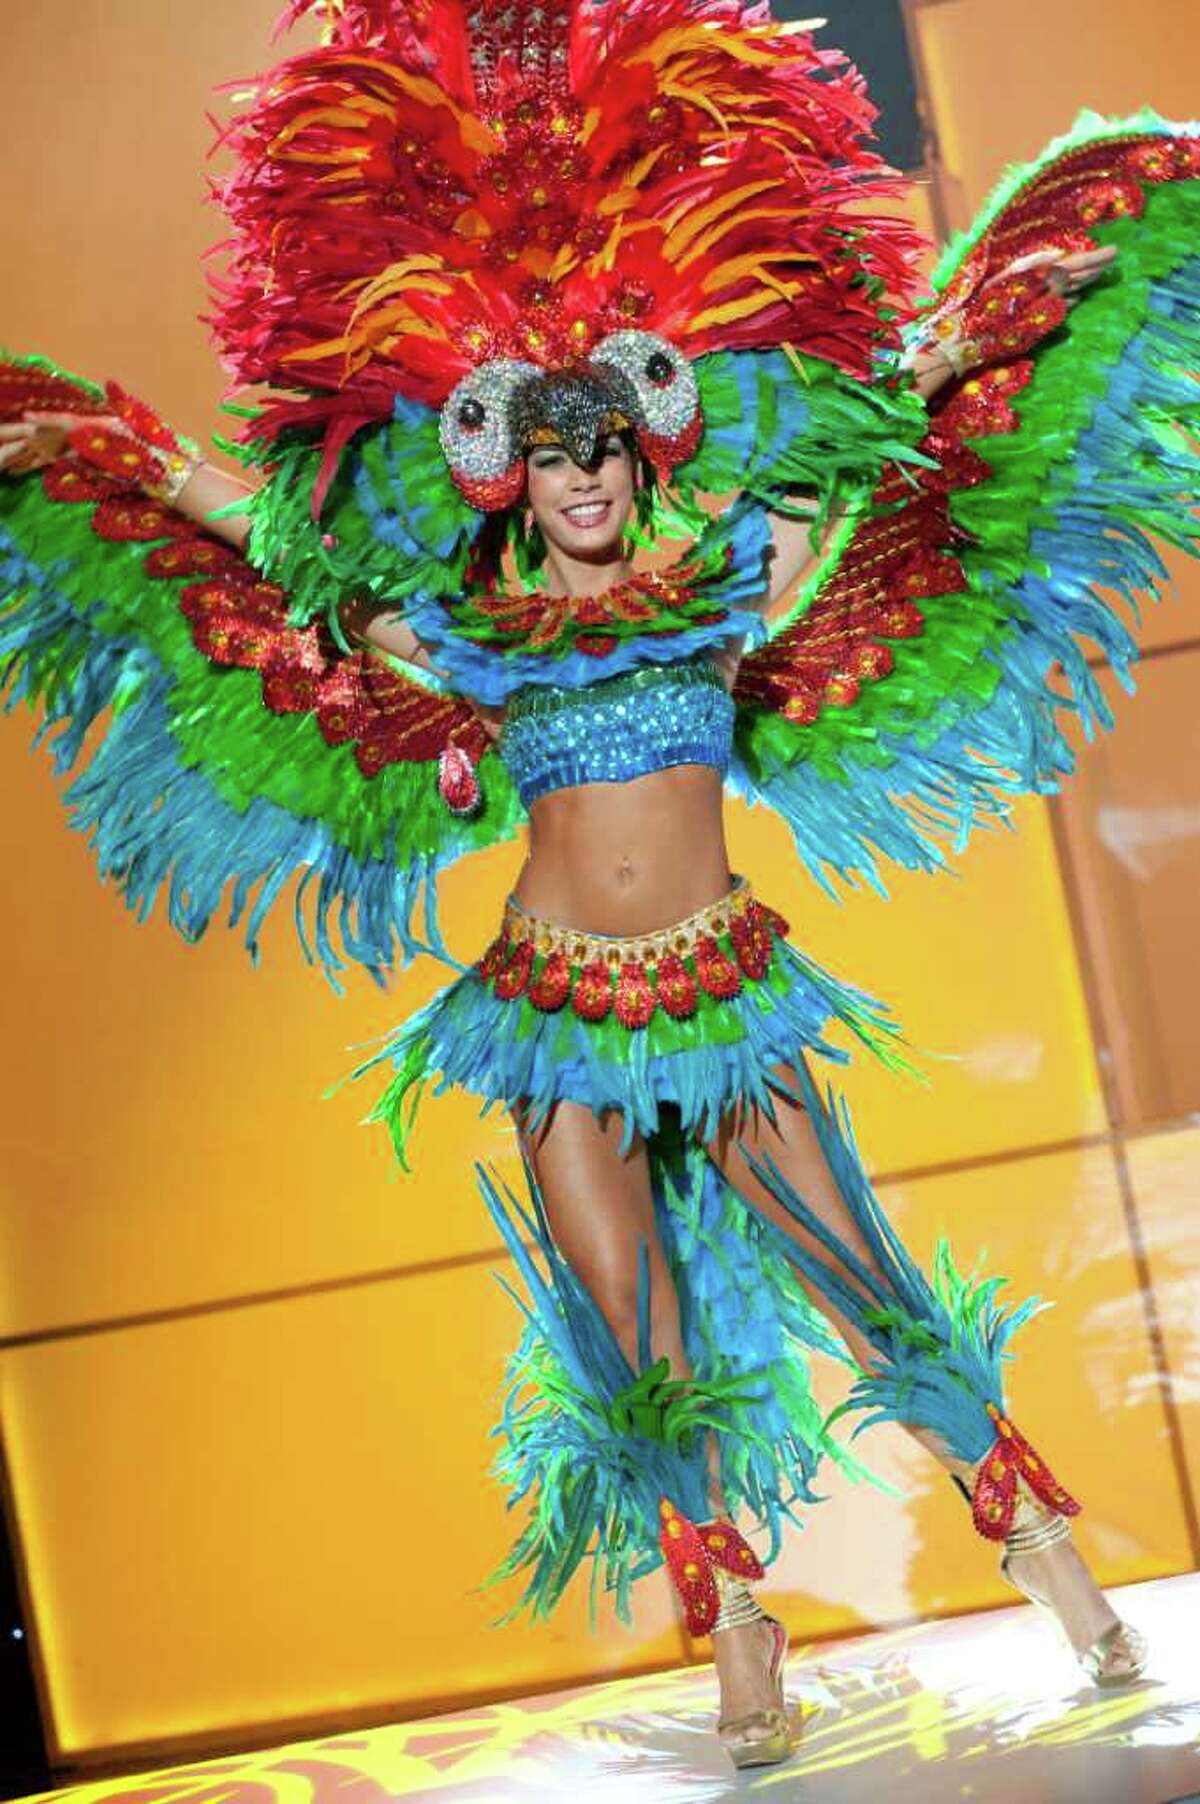 Miss Bolivia 2011, Olivia Pinheiro pre-tapes in her National Costume onstage at Credicard Hall on September 7, 2011. She is preparing to compete in the 2011 MISS UNIVERSE® Competition on September 12 at 9:00 p.m. ET broadcast LIVE on NBC from Credicard Hall in São Paulo, Brazil.